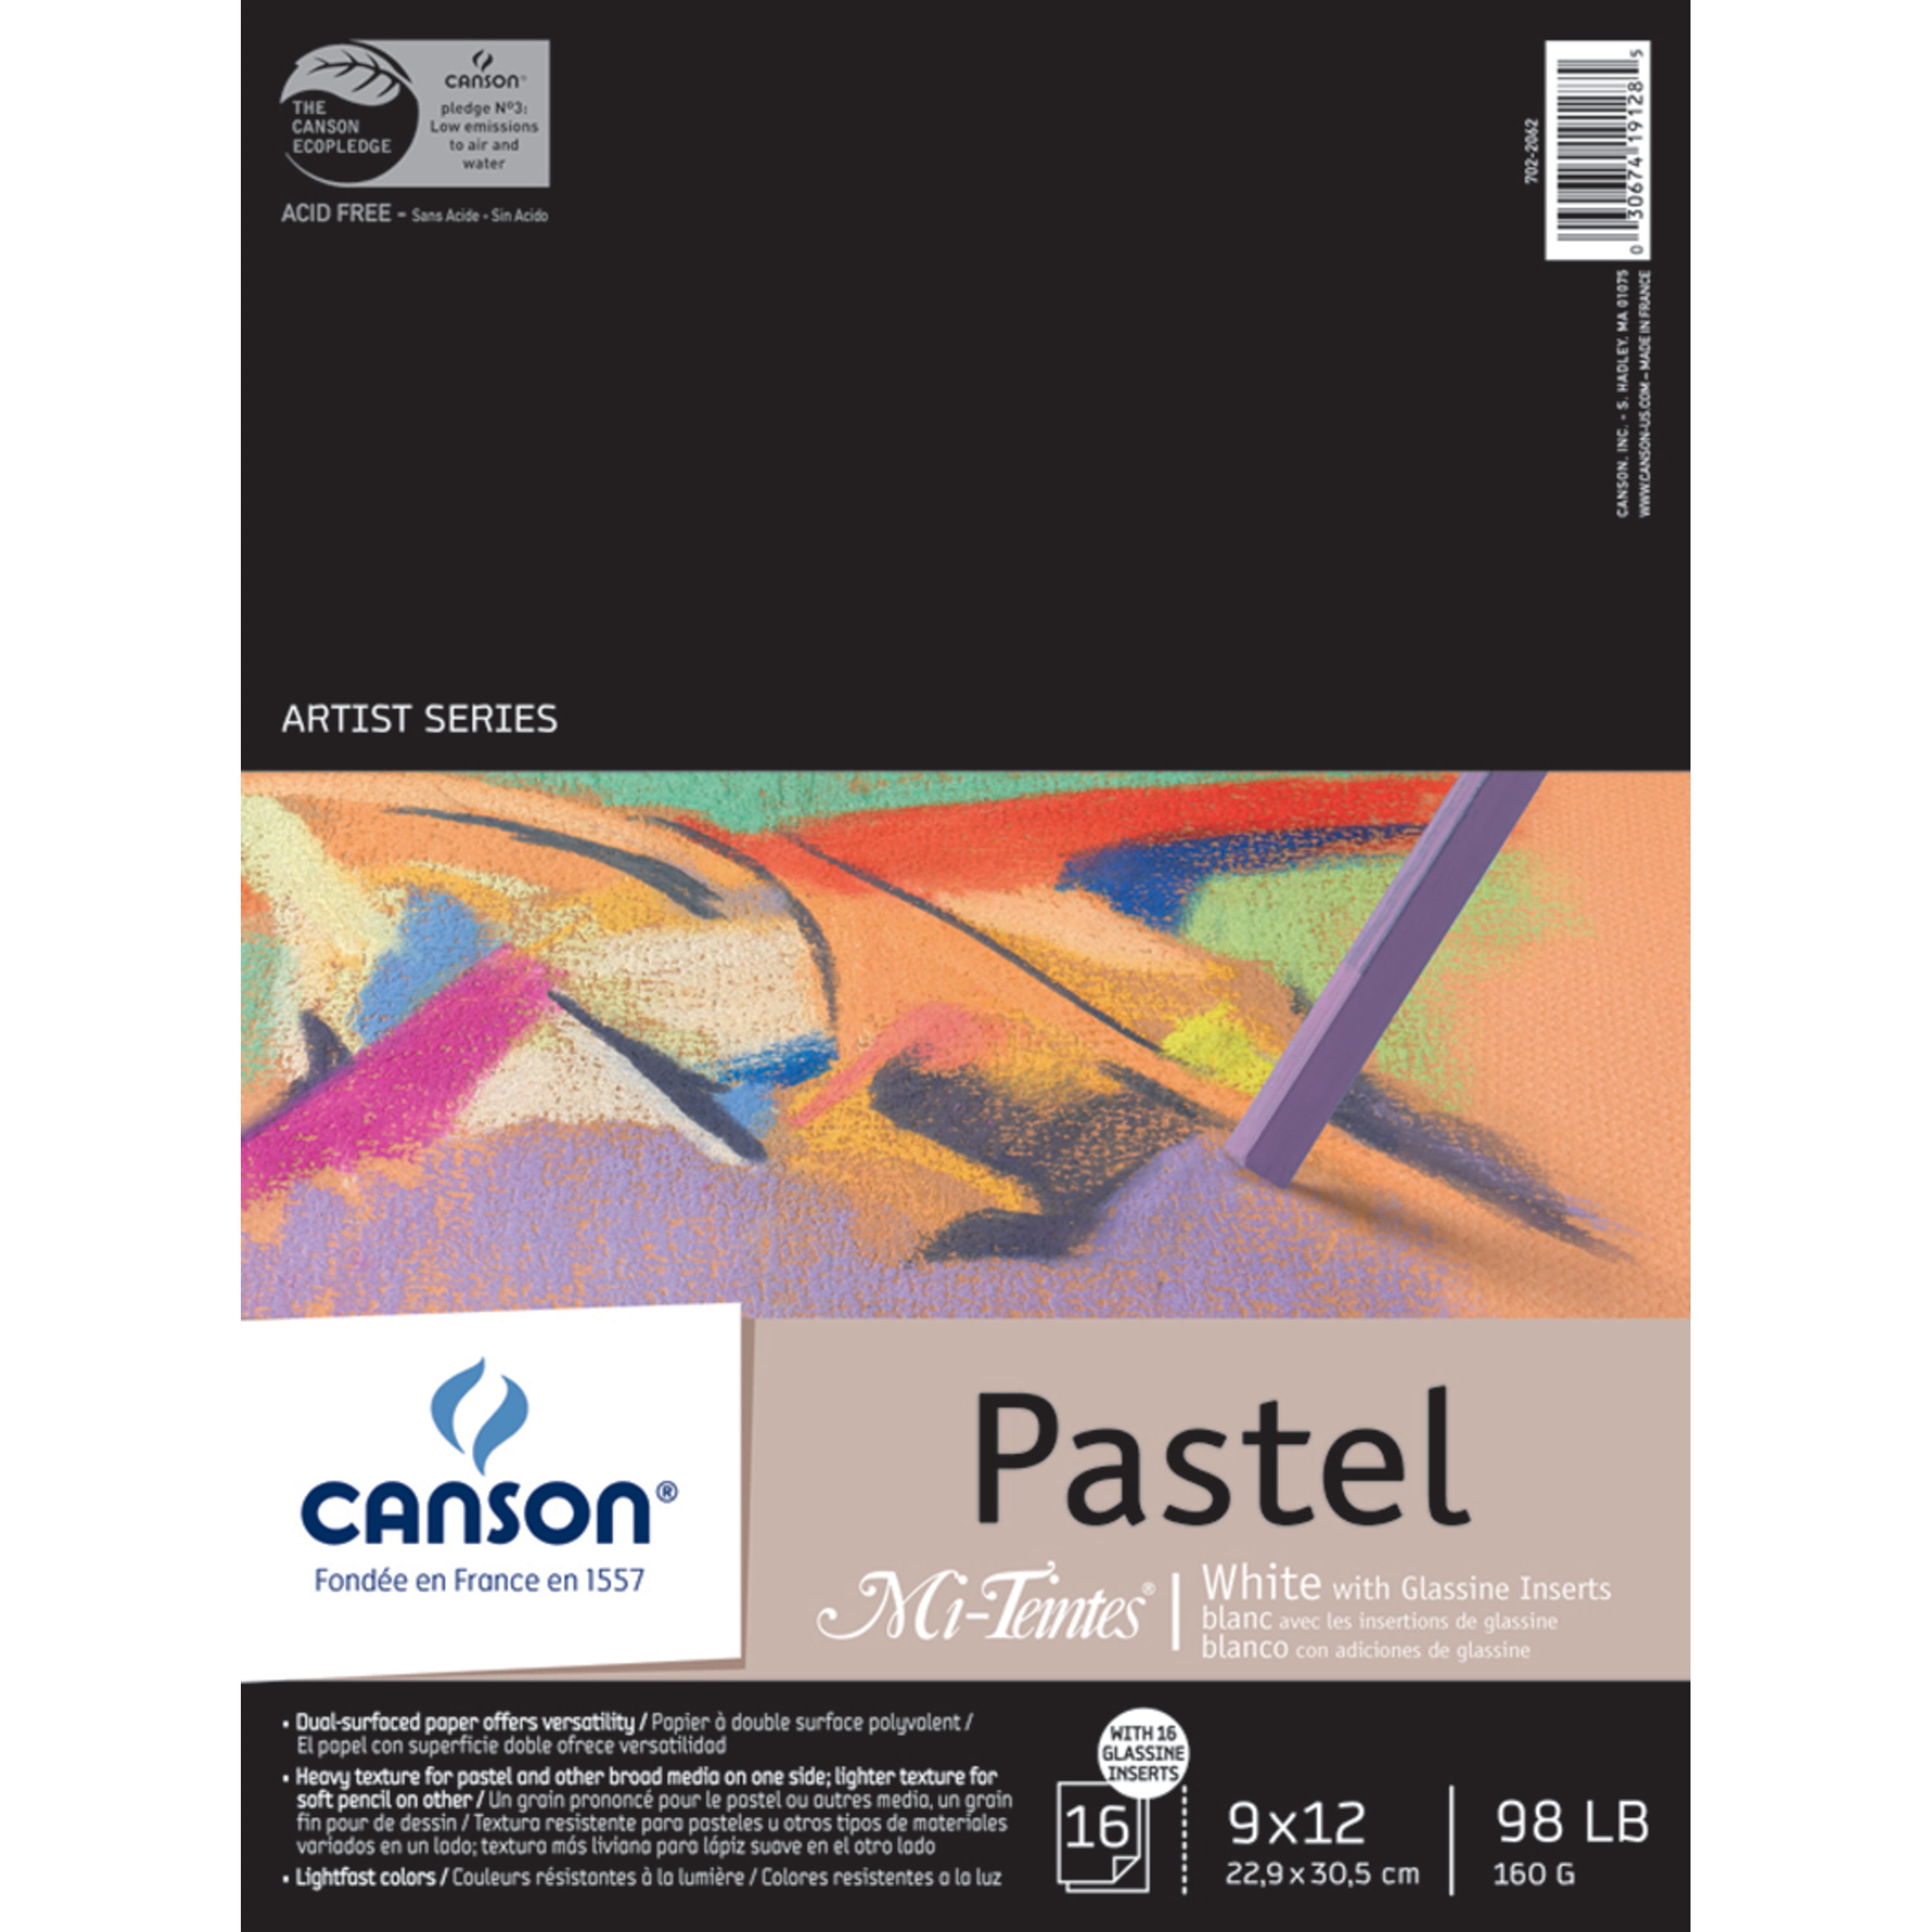 25 36 x Canson Glassine Art Paper Roll for Use as Slip Sheet to Protect Artwork 